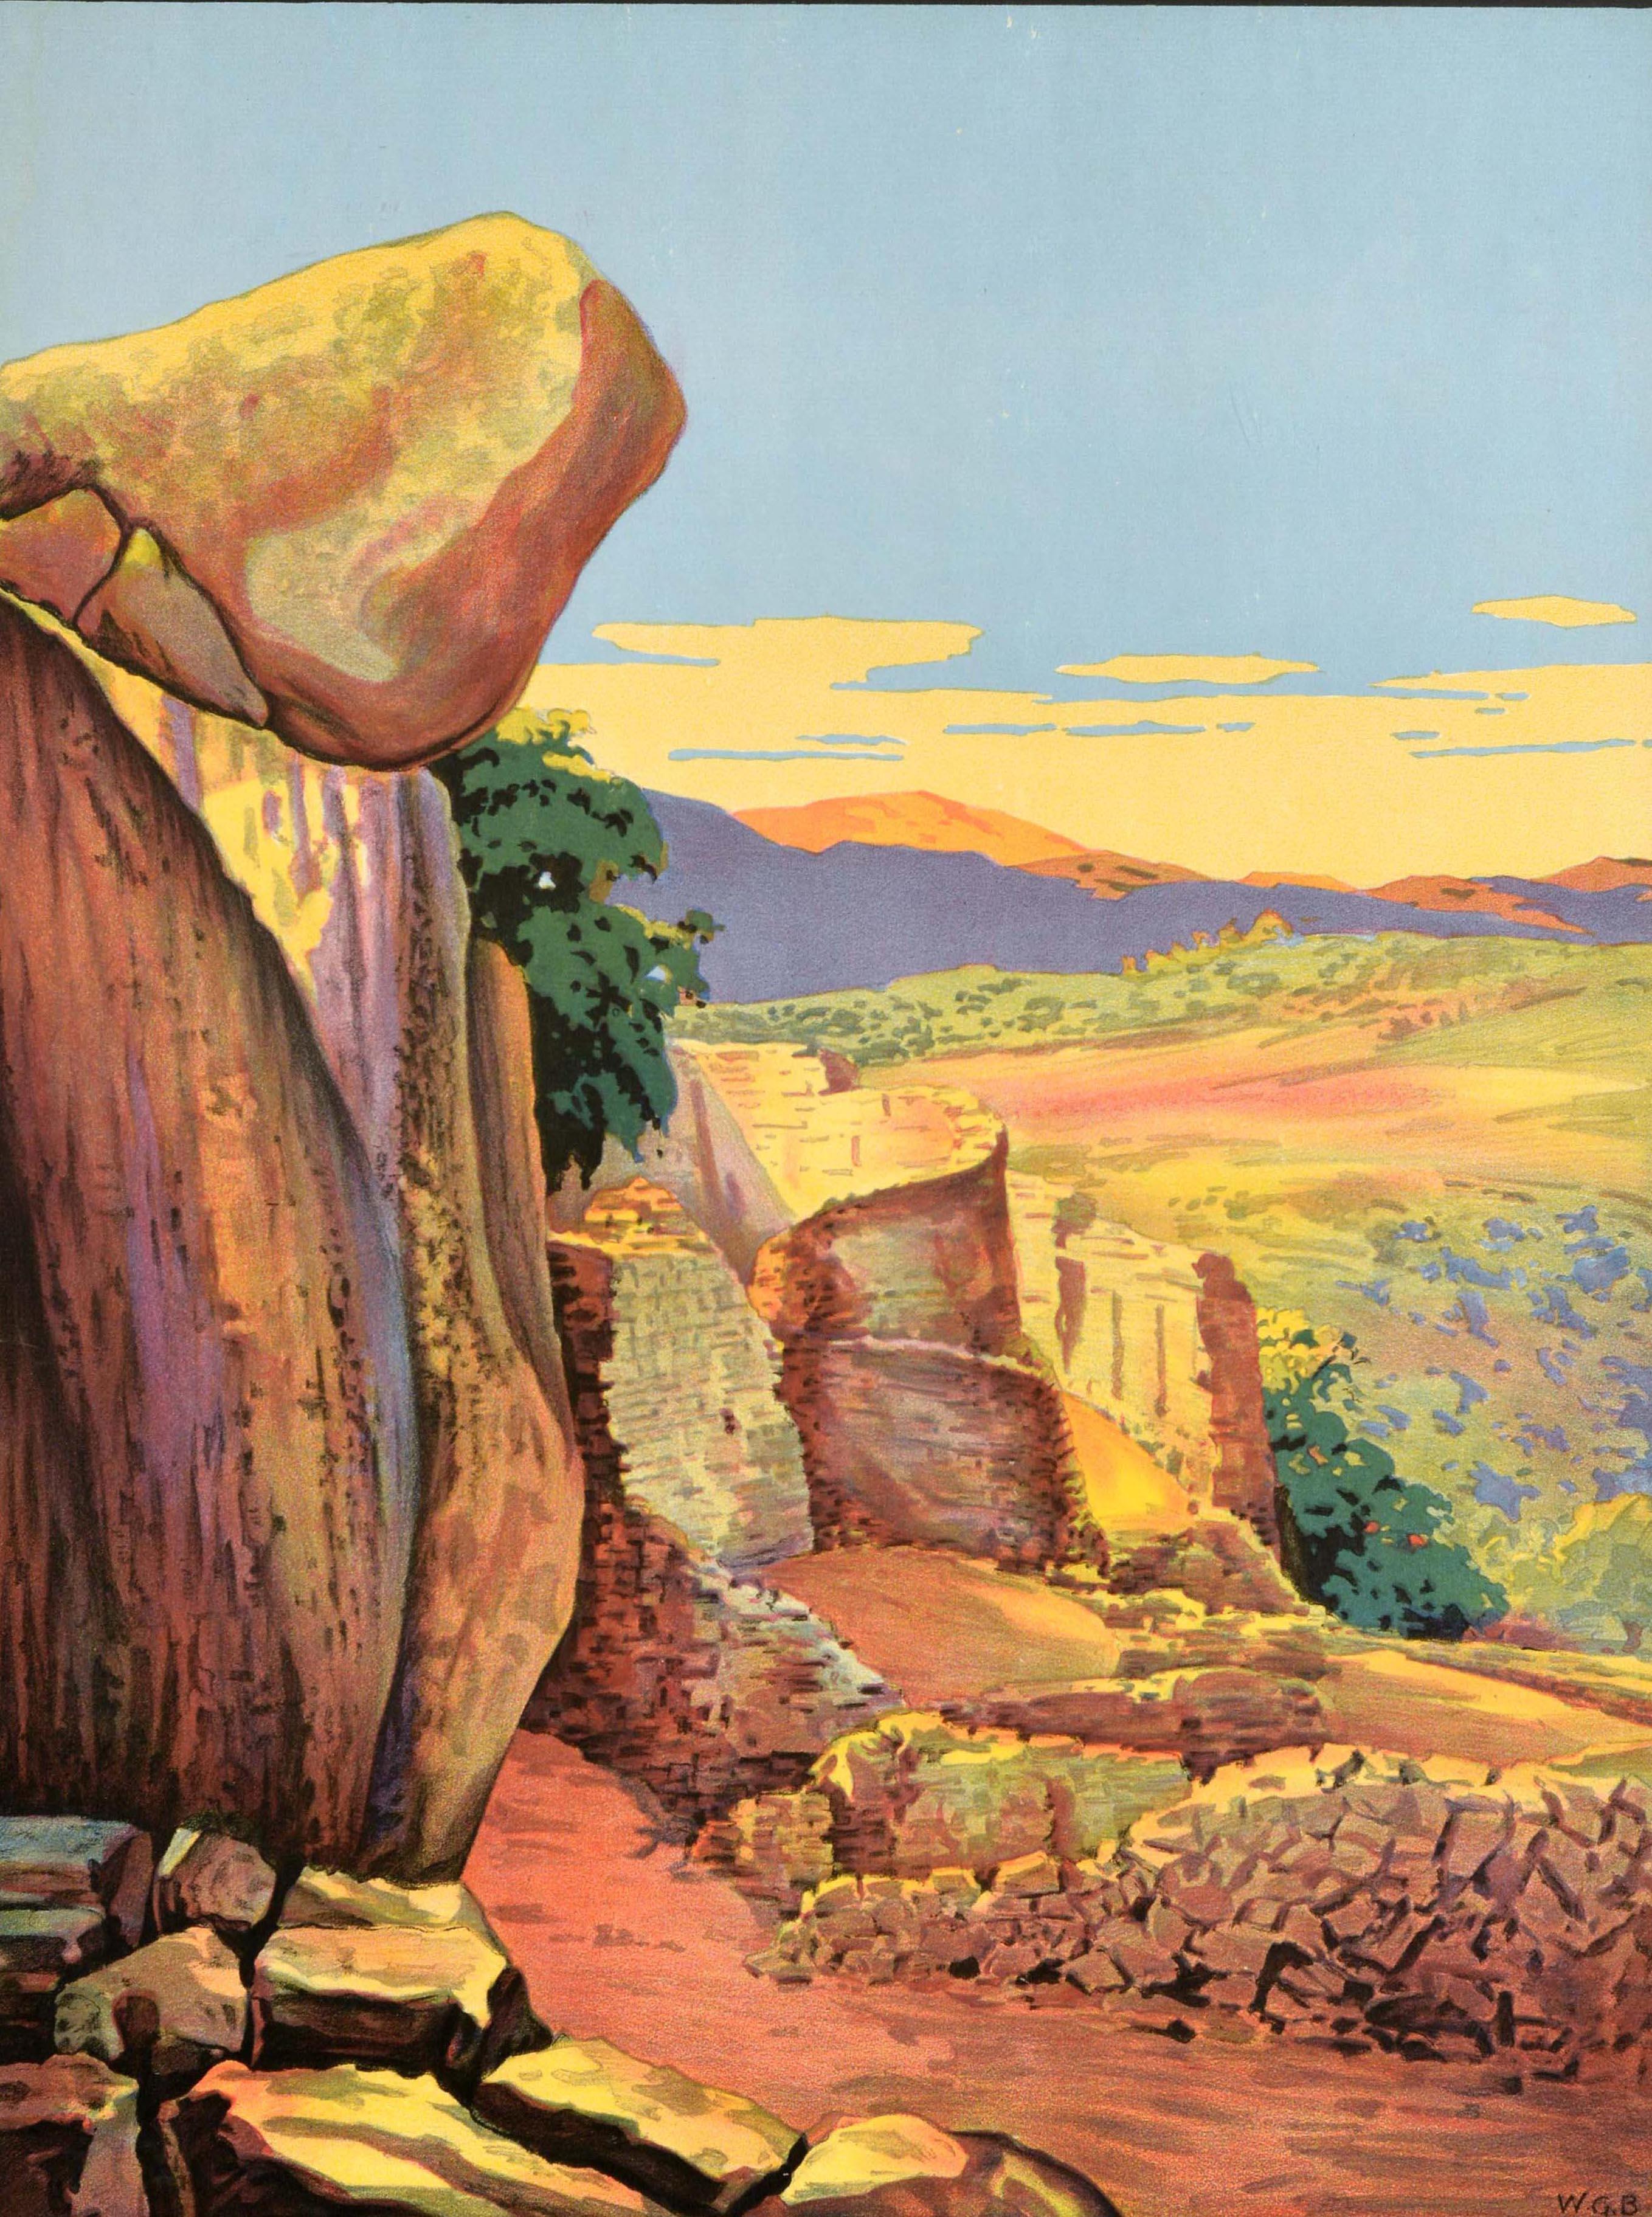 Original vintage Africa travel poster for Zimbabwe Southern Rhodesia featuring a stunning scenic view by William George Bevington (1881-1953) depicting rocks and the ruins of the ancient 11th-15th century city stone walls with trees and hills in the